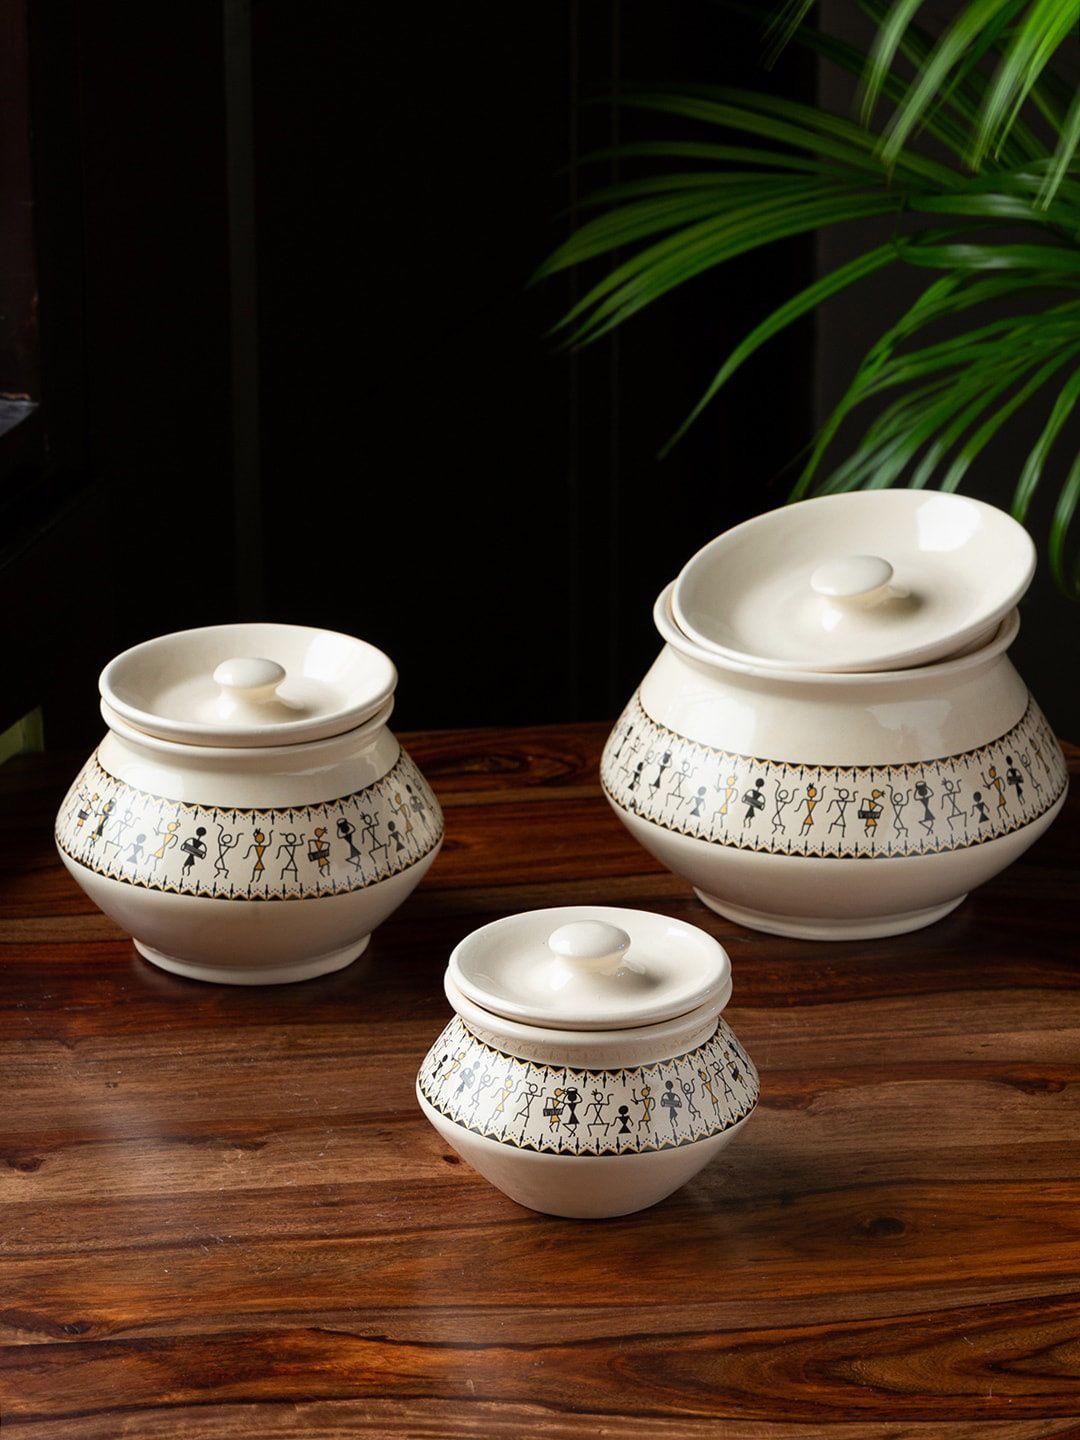 ExclusiveLane Set of 3 Off-White & Black Printed Serving Handis With Lids Price in India